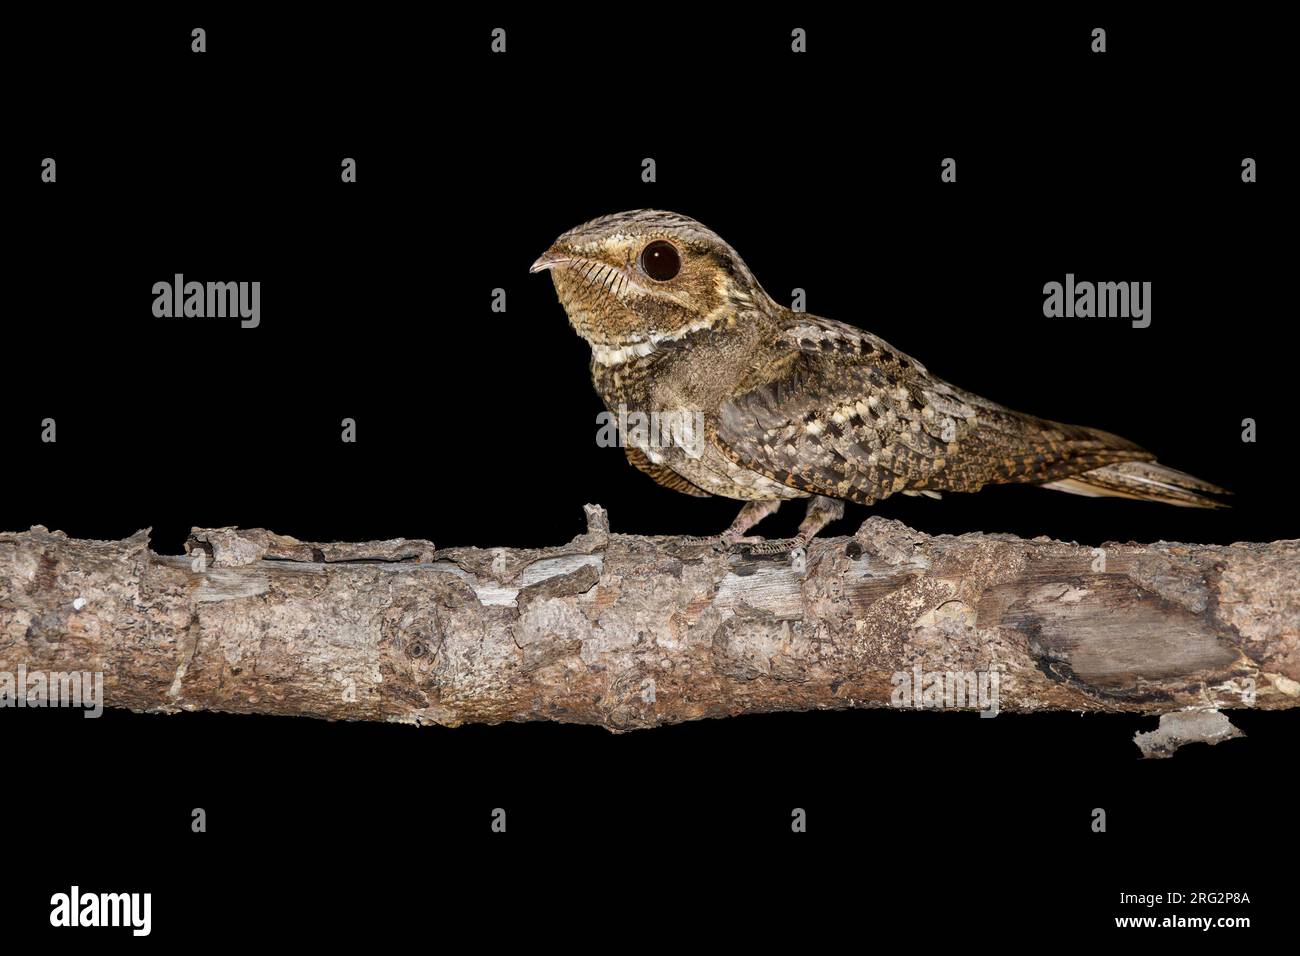 Adult Chuck-will's-widow, Antrostomus carolinensis) perched on a branch in the night in Miami-Dade County, Florida, USA, during spring. Stock Photo